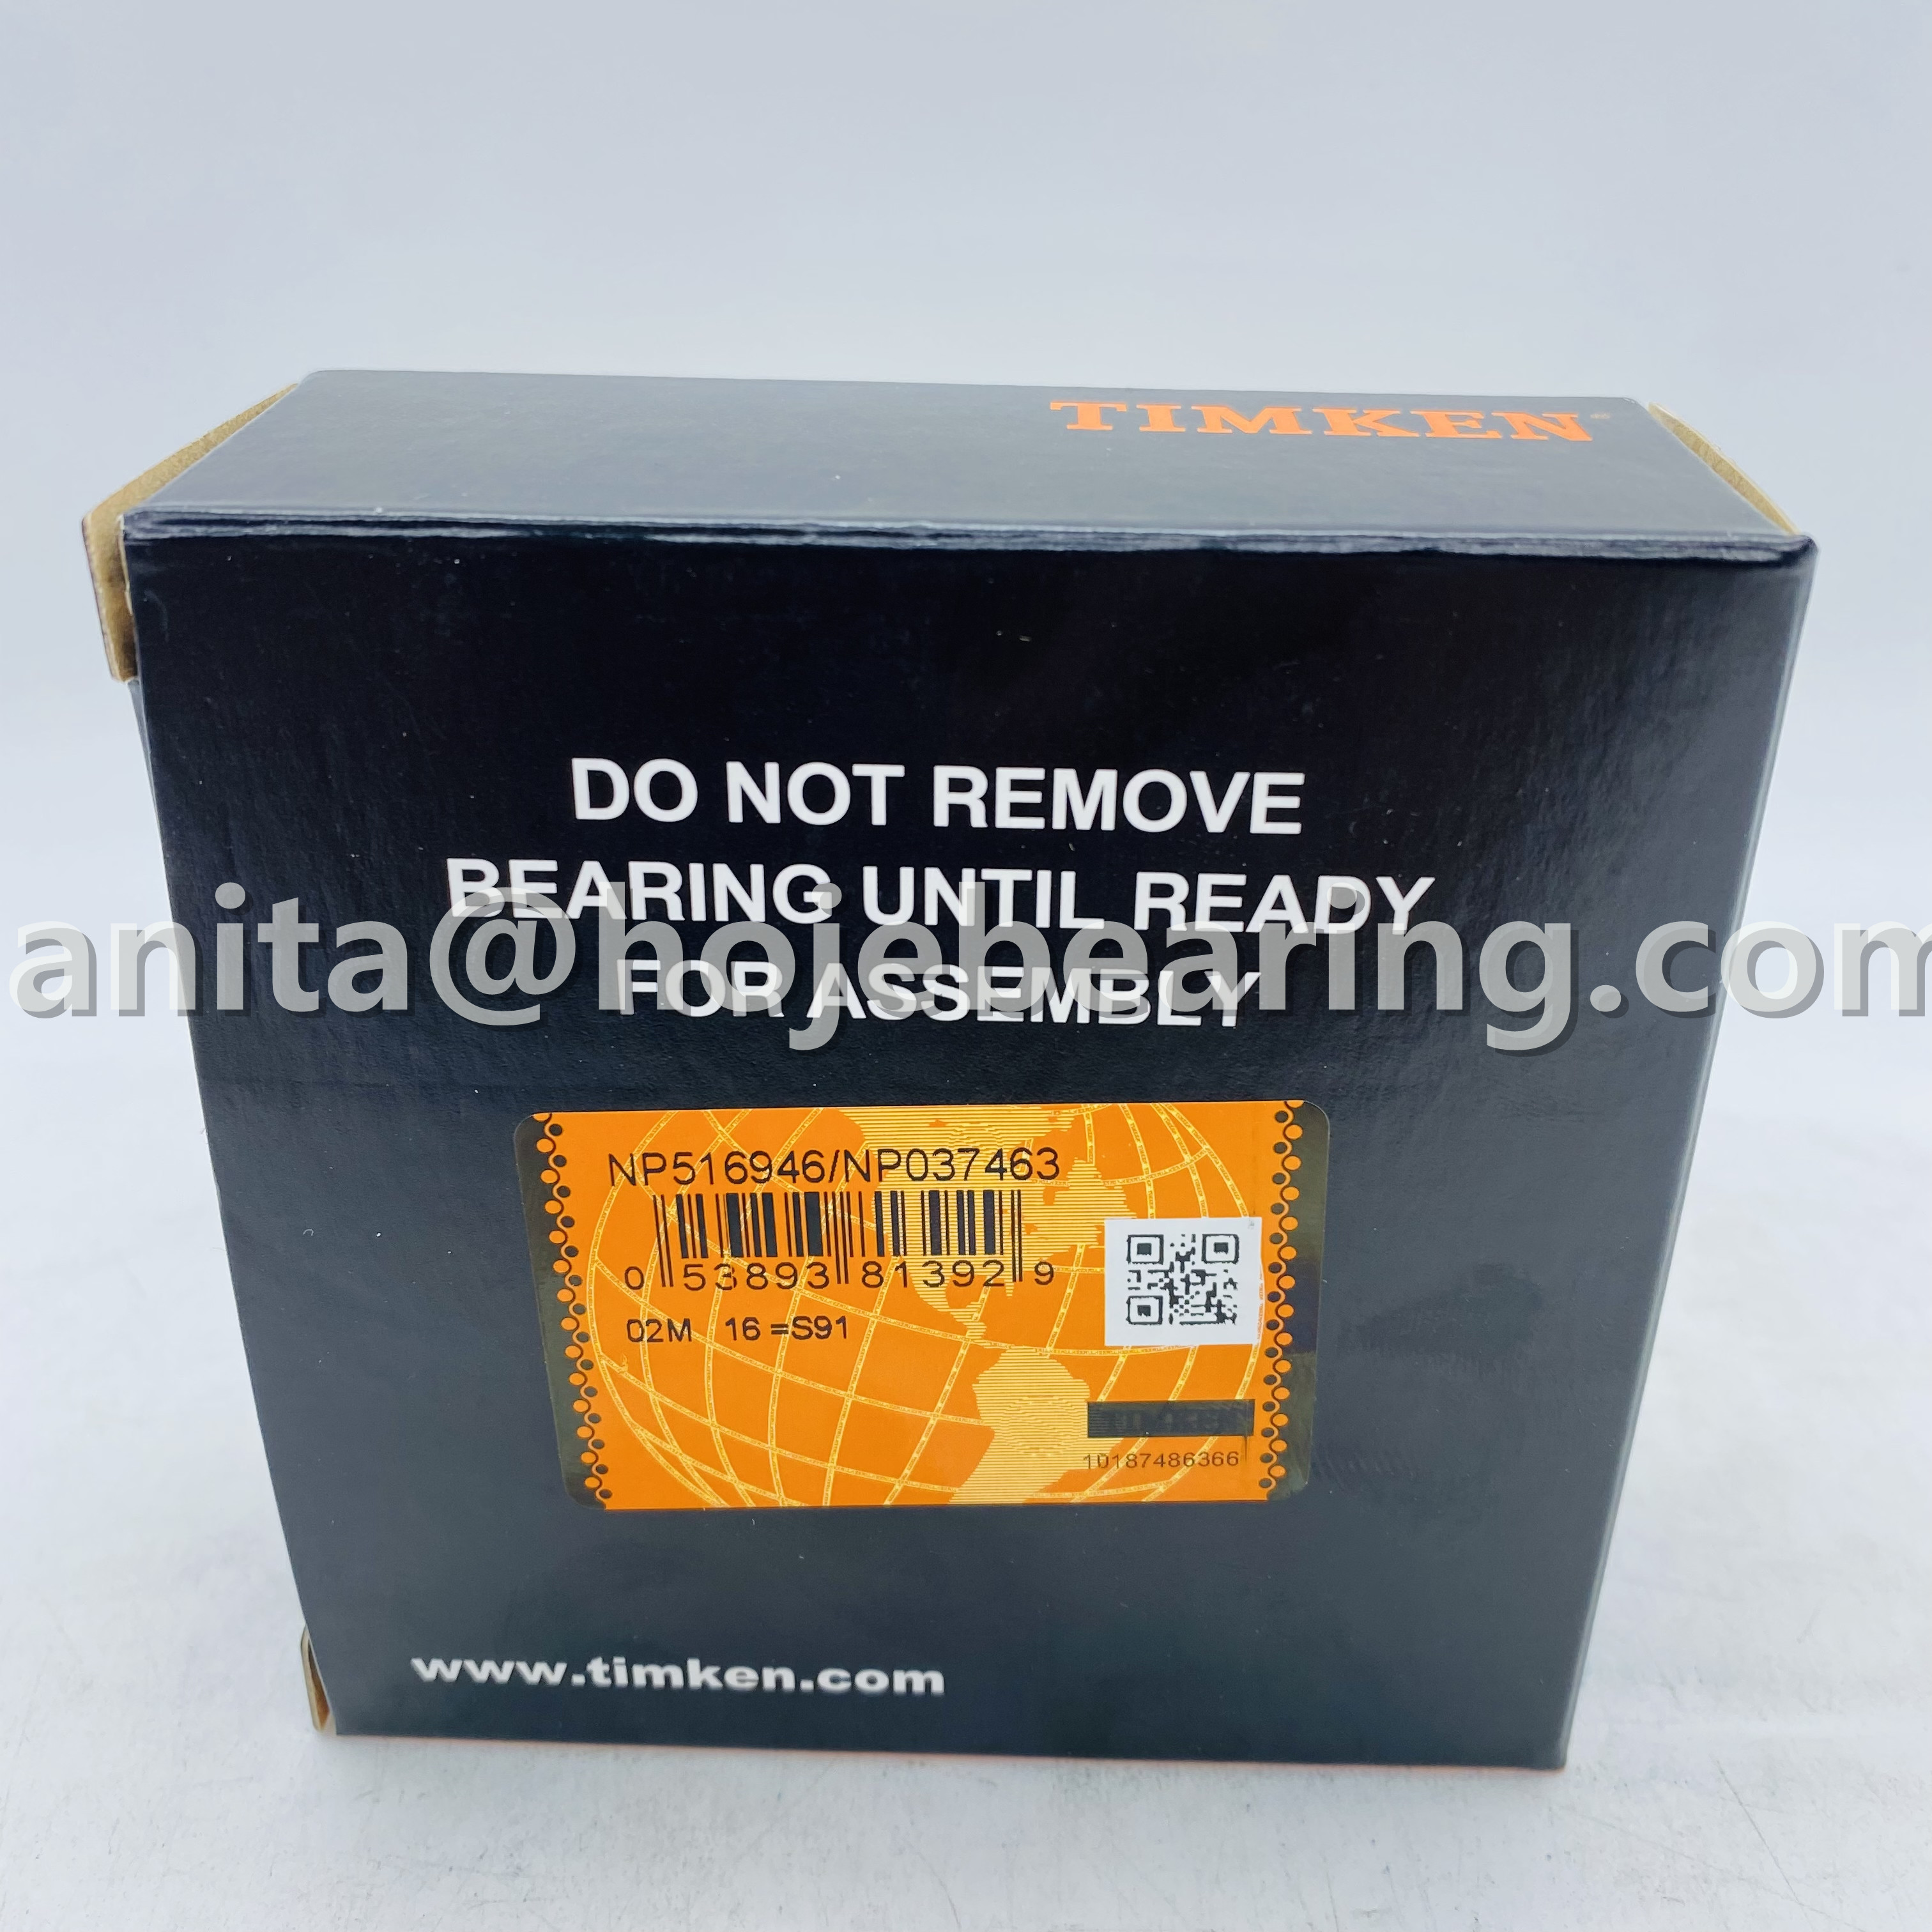 NP516946-NP037463 TIMKEN Tapered roller bearings 40x90x33 mm